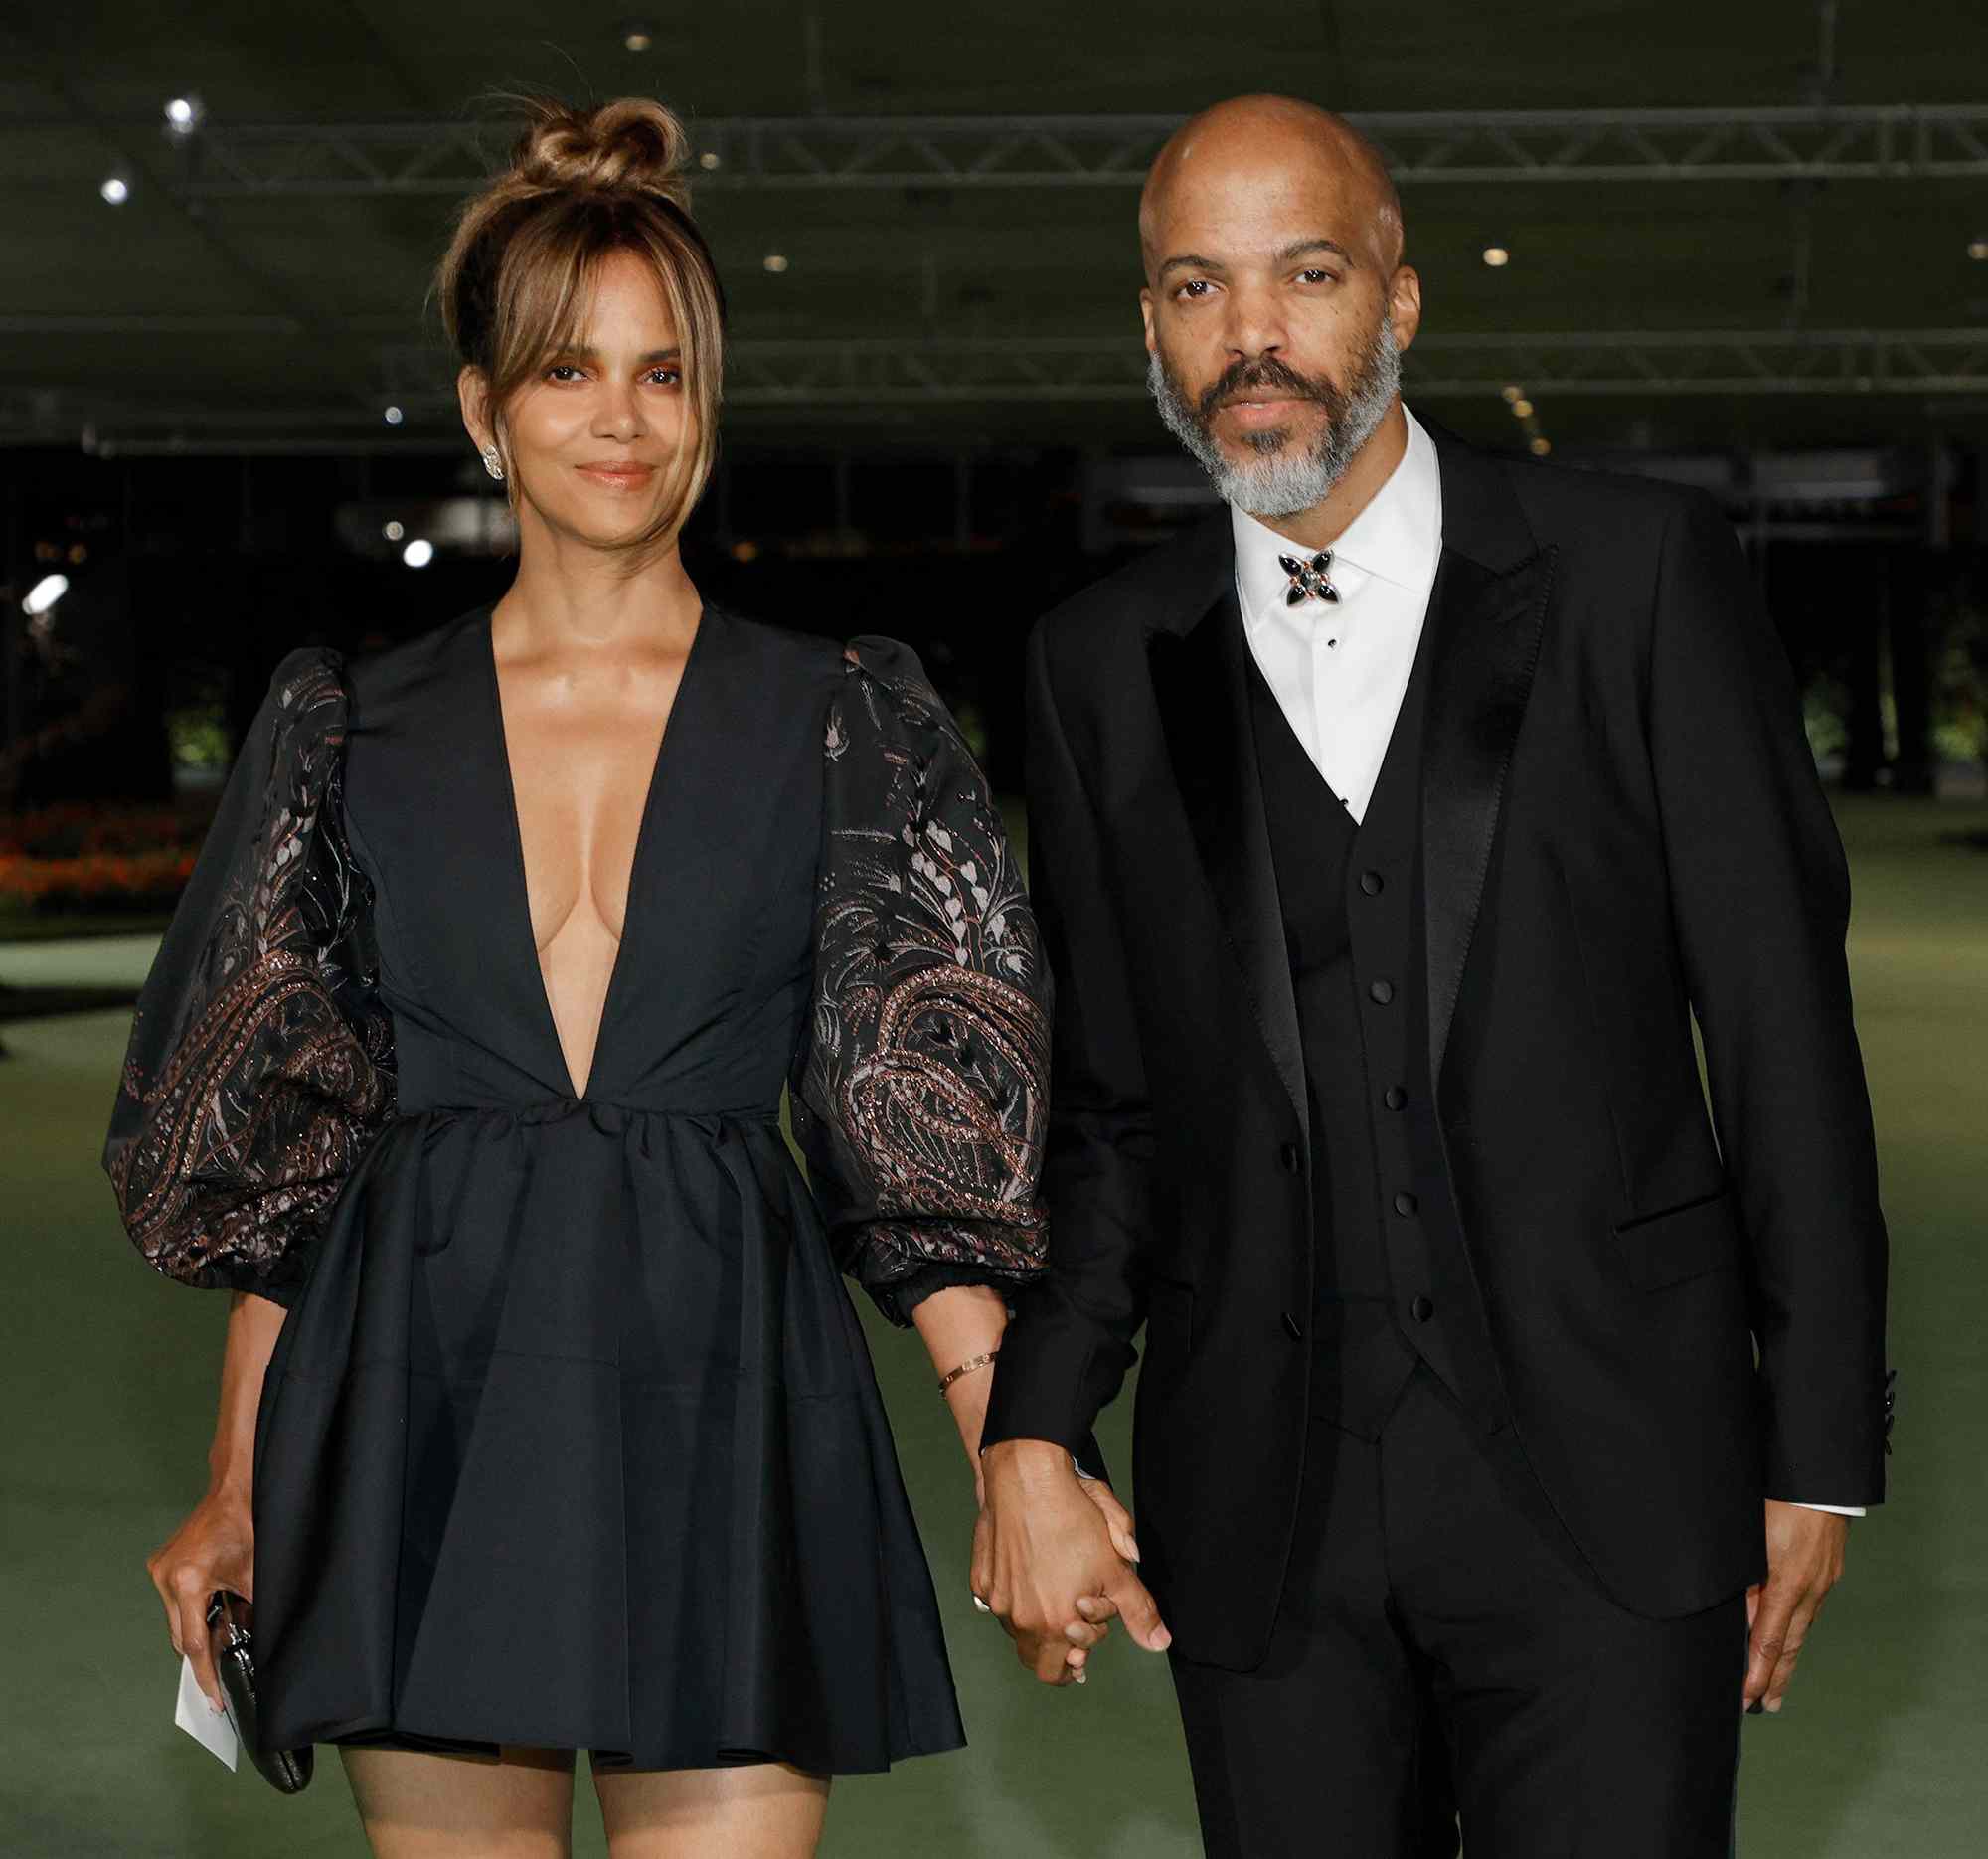 Halle Berry and Van Hunt attend The Academy Museum of Motion Pictures Opening Gala at The Academy Museum of Motion Pictures on September 25, 2021 in Los Angeles, California